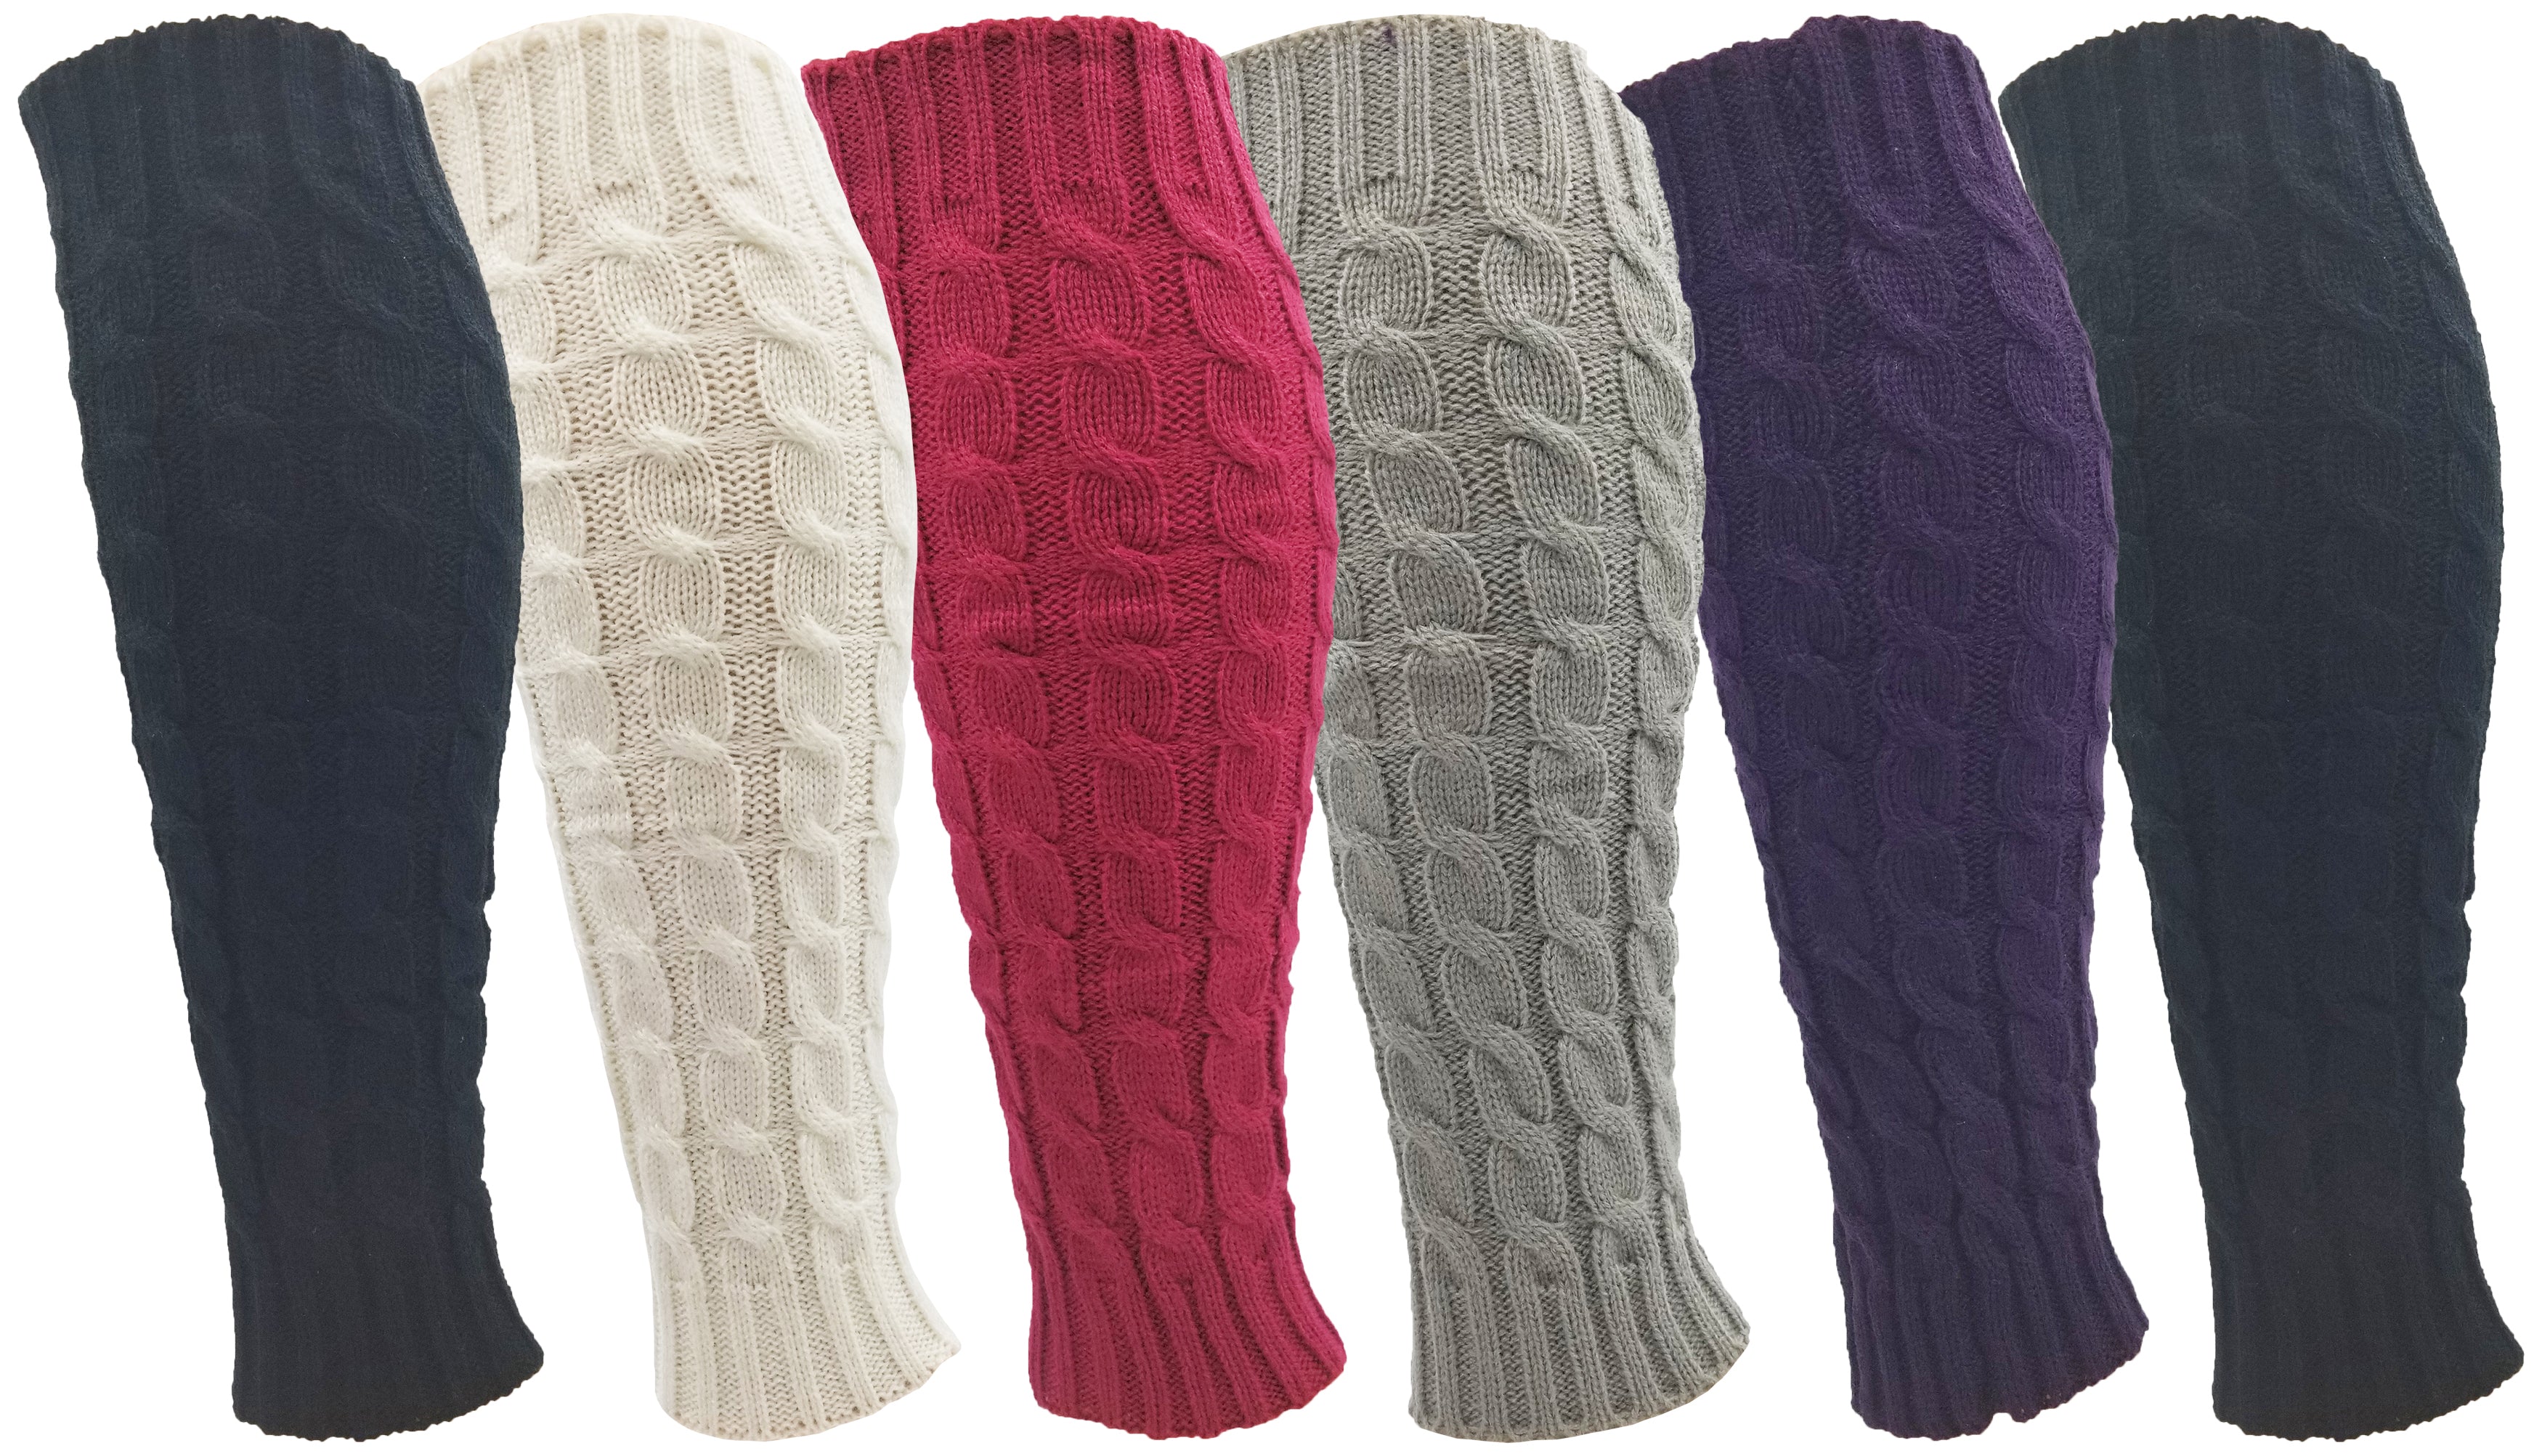 2 Pairs Women's Cable Knit Leg Warmers Winter Warm Over The Knee Socks Long